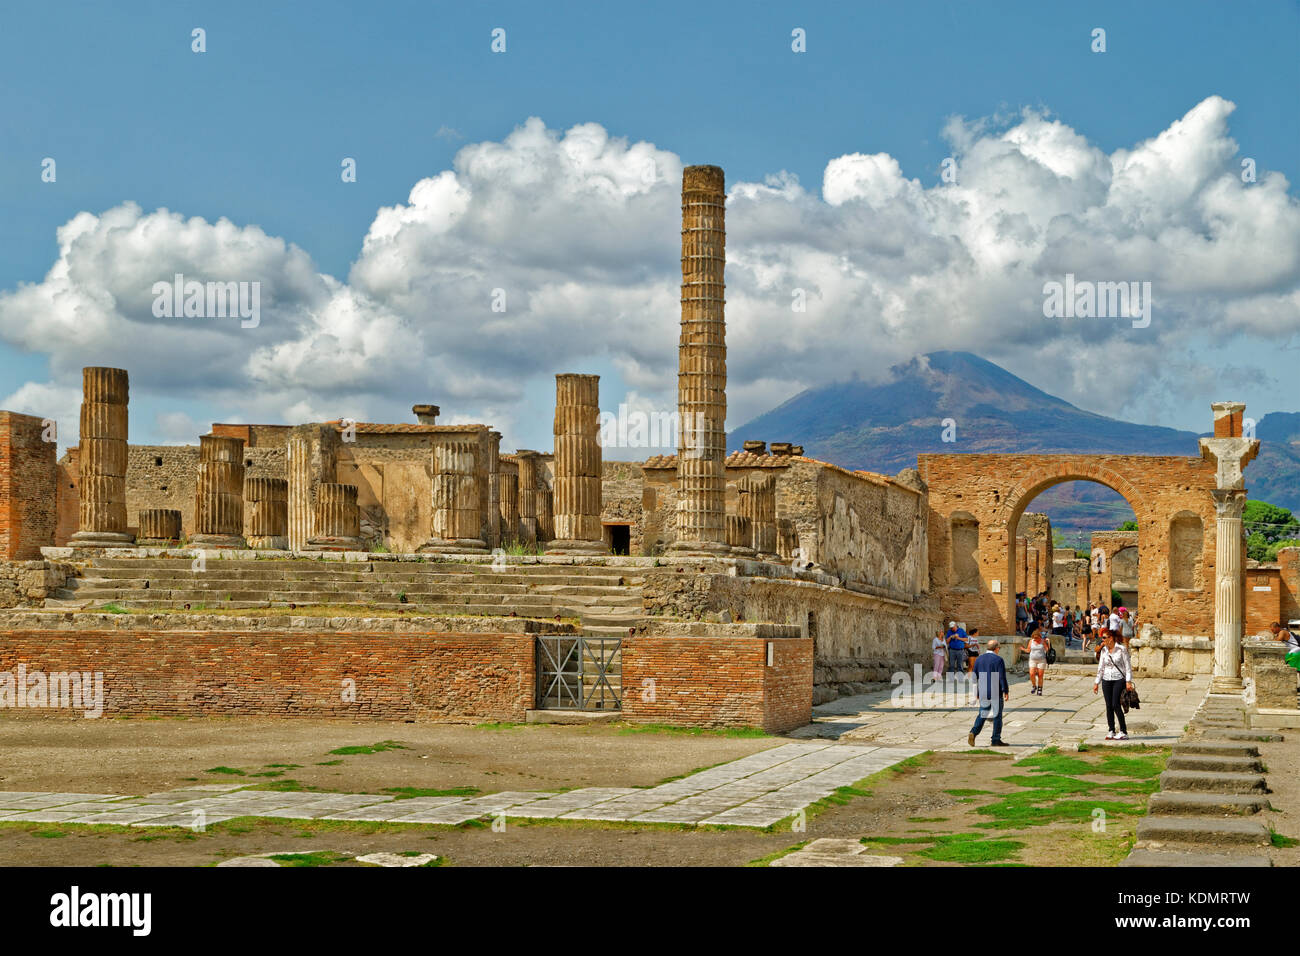 Temple of Giove & Trajan Arch at the Forum in the ruined Roman city of Pompeii at Pompei Scavi near Naples, Italy. Mount Vesuvius in the distance. Stock Photo